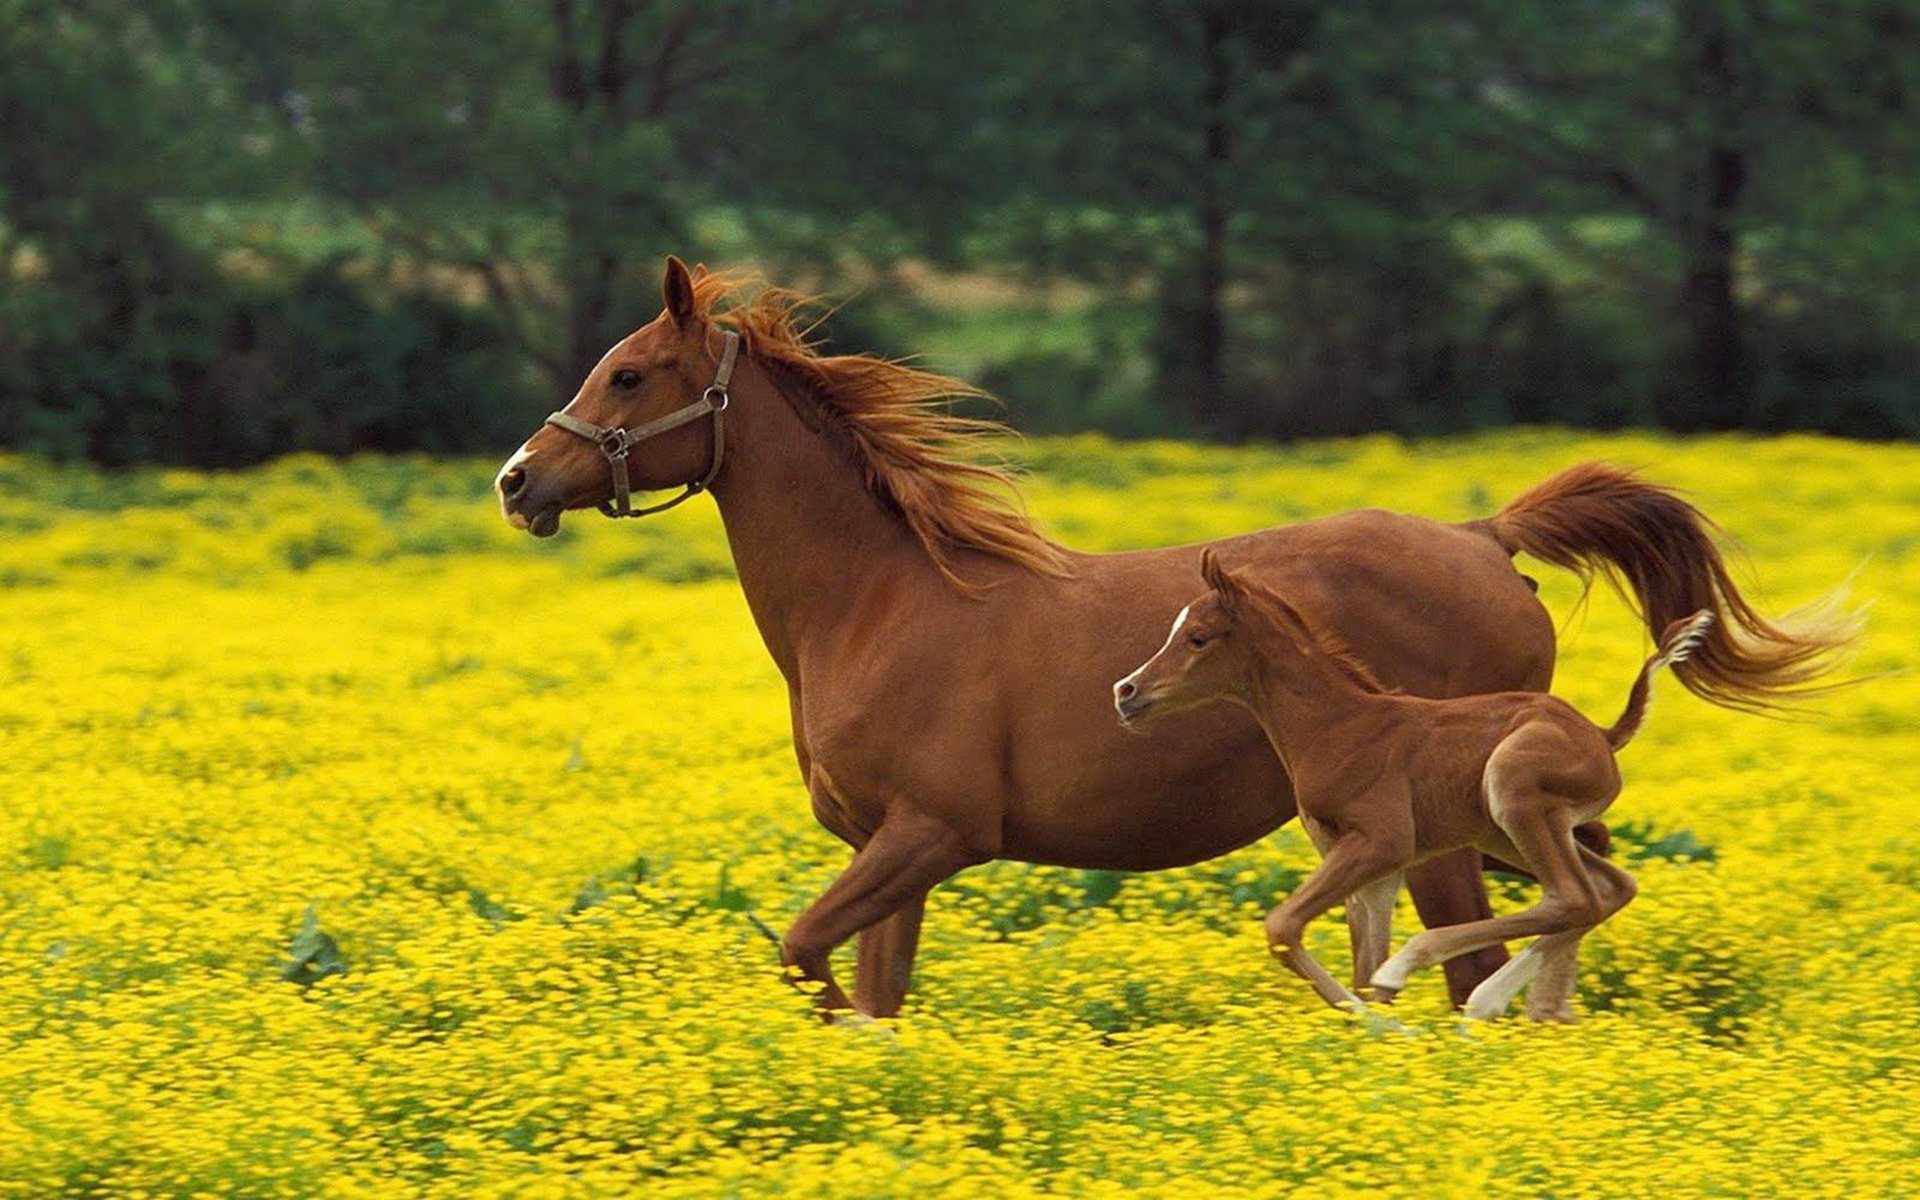 Horse With Baby Horse In Flowers Ground HD Wallpapers